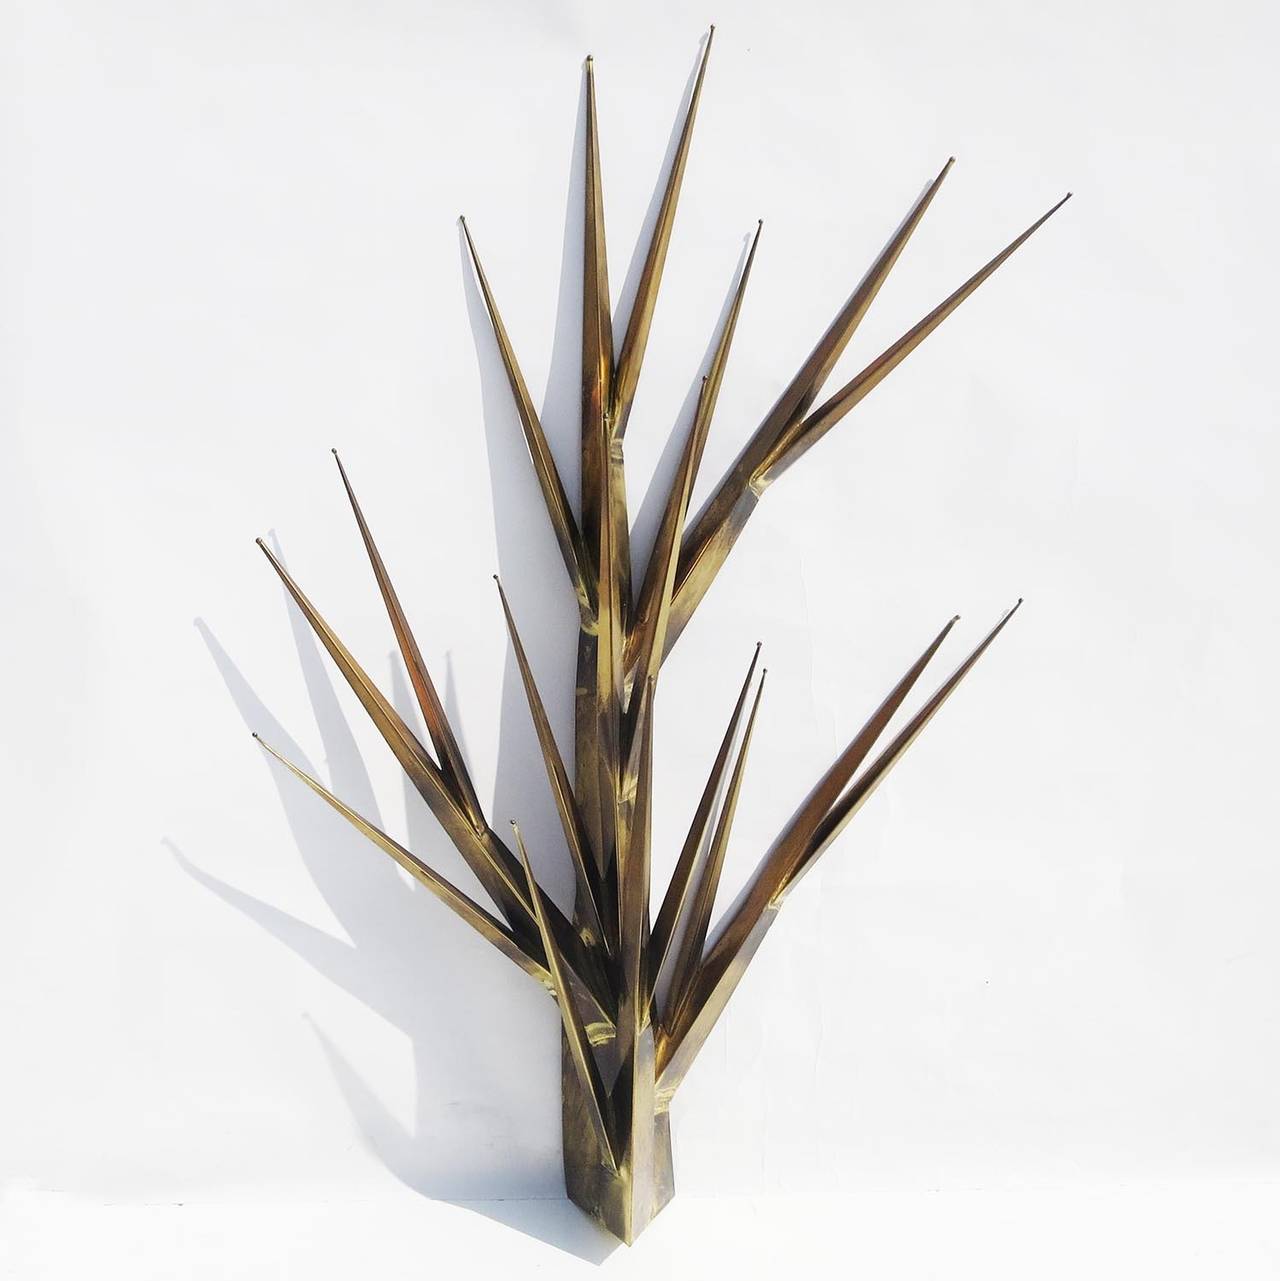 I have seen and owned many Jere sculptures over the years and have never seen anything close to this! This desert like spiny form is executed in brass and welded together. There is an overall patina to all surfaces, consistent with its age. It is